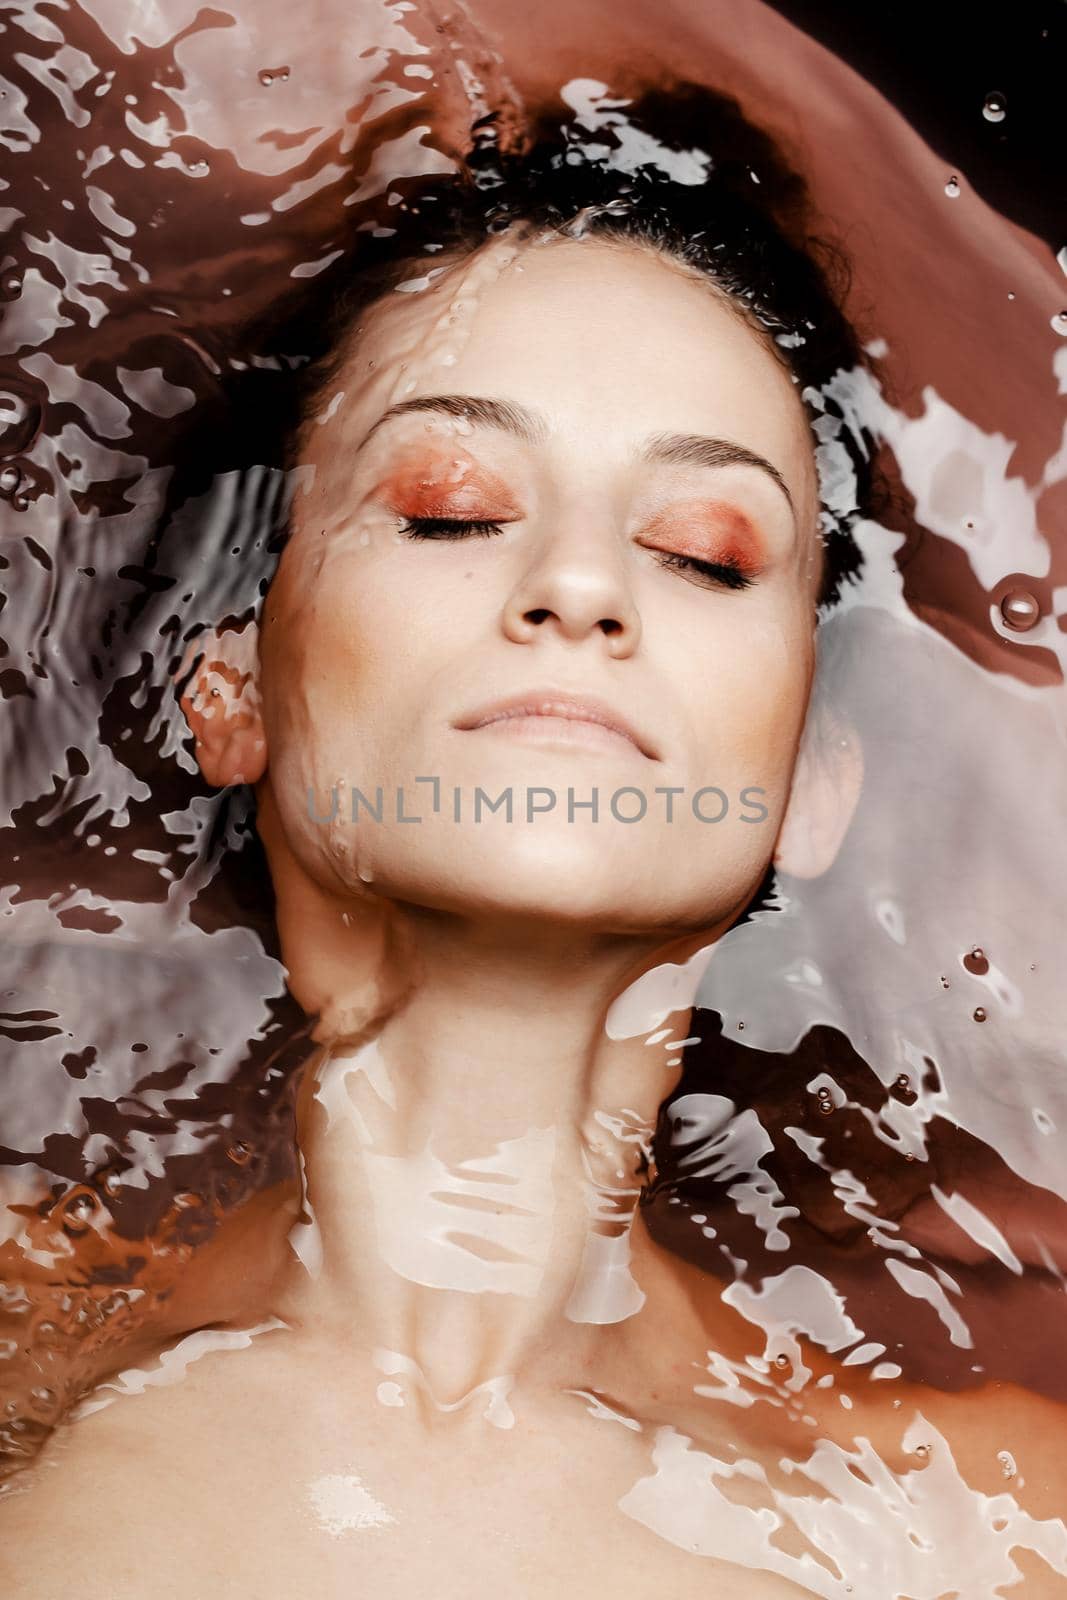 Underwater beauty portrait of a beautiful caucasian girl. Eyes closed. Red colored water.